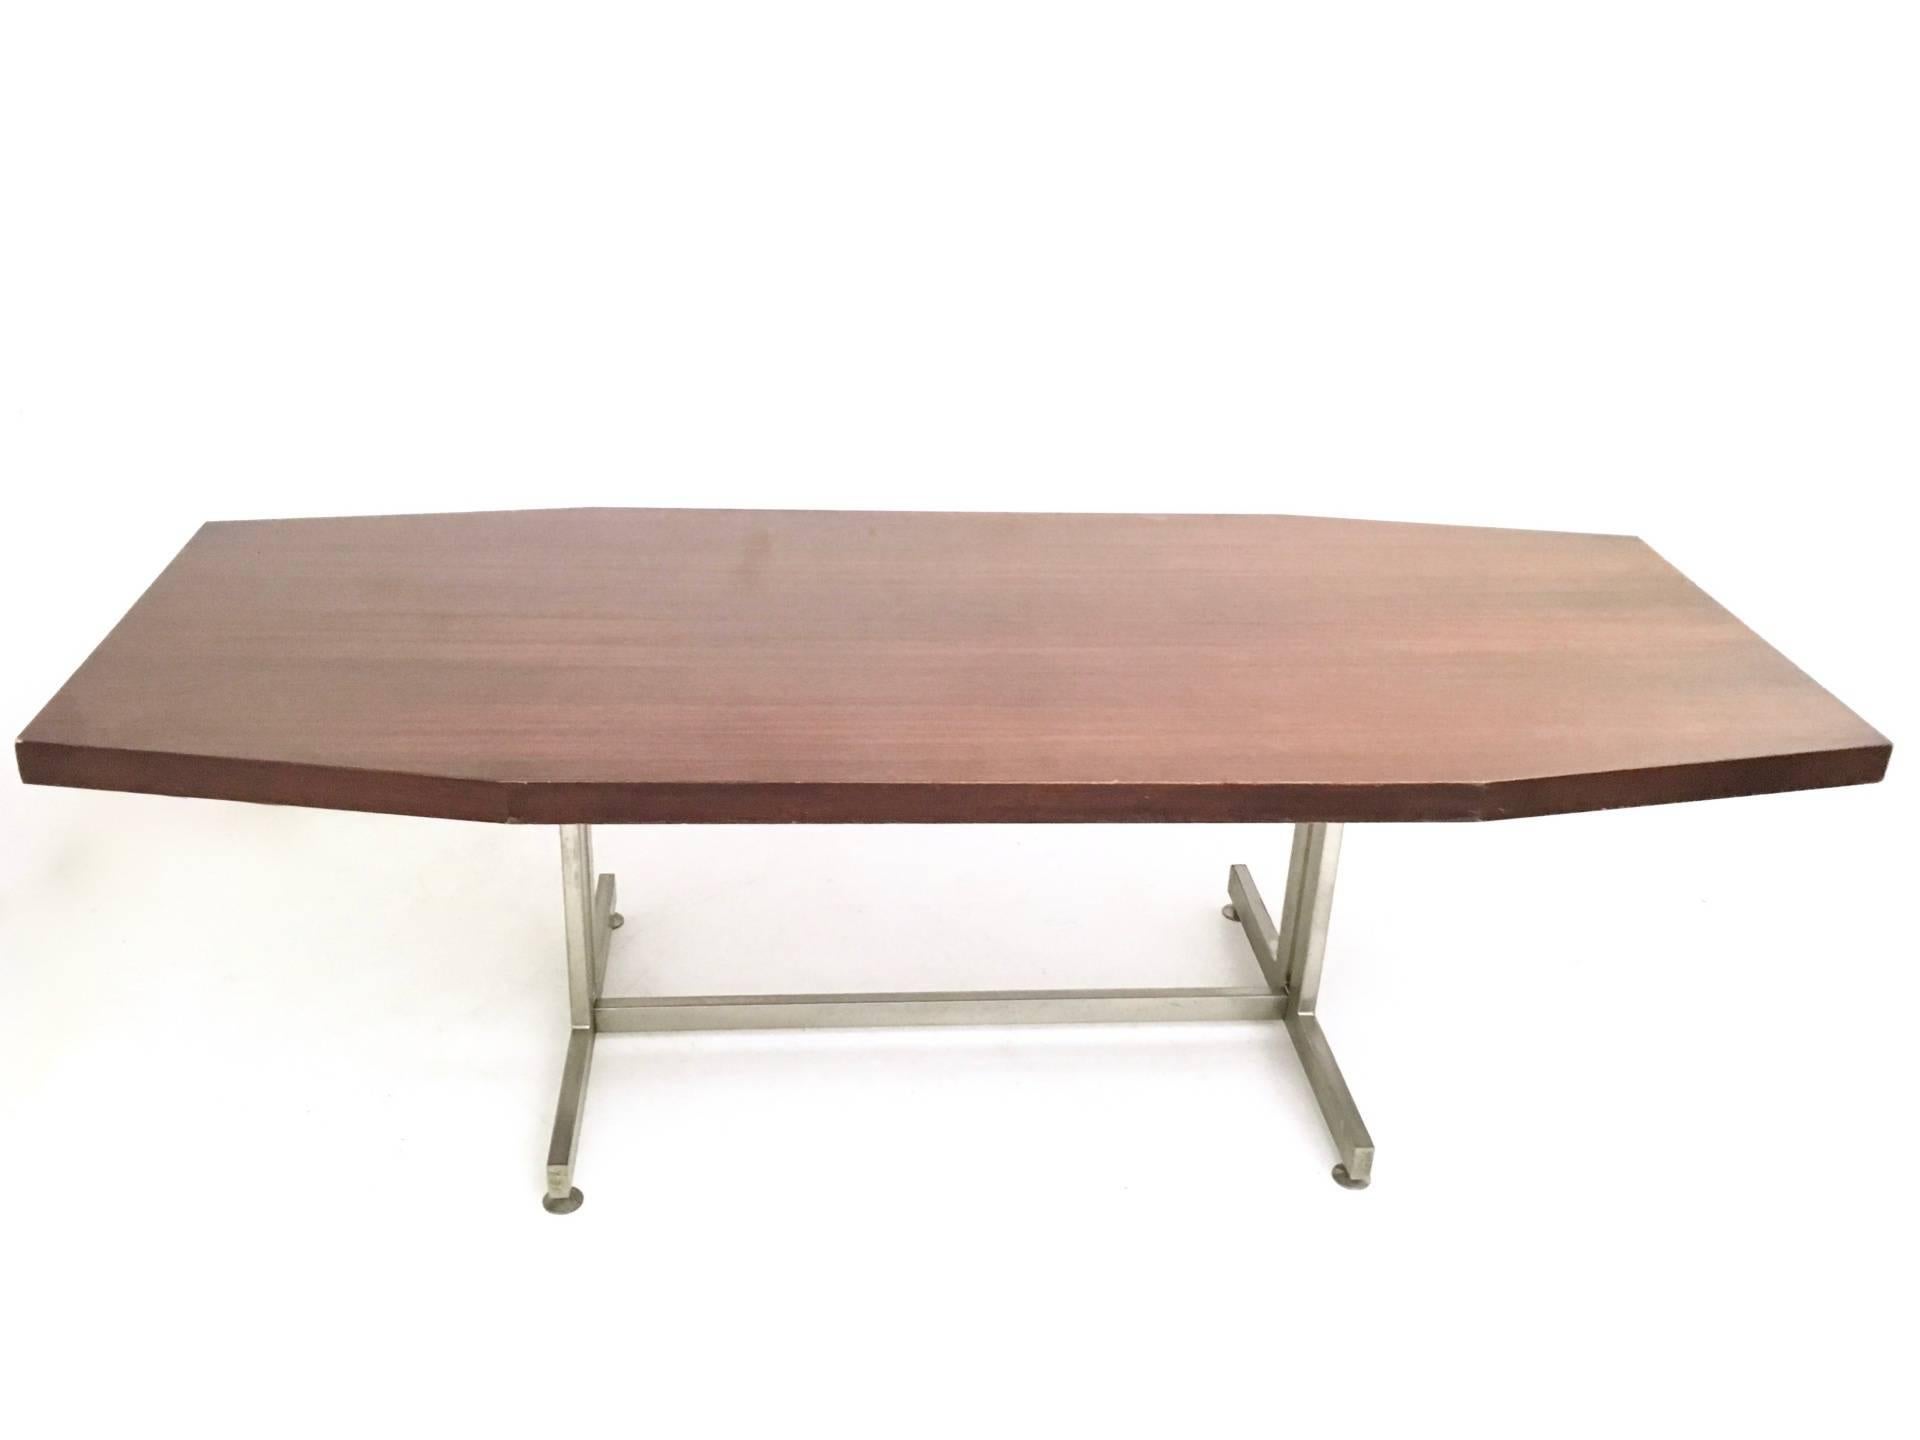 It features a wood top and a steel structure.
In very good original condition. 

Measure: Width 240 cm
Depth 100 cm
Height 75 cm.